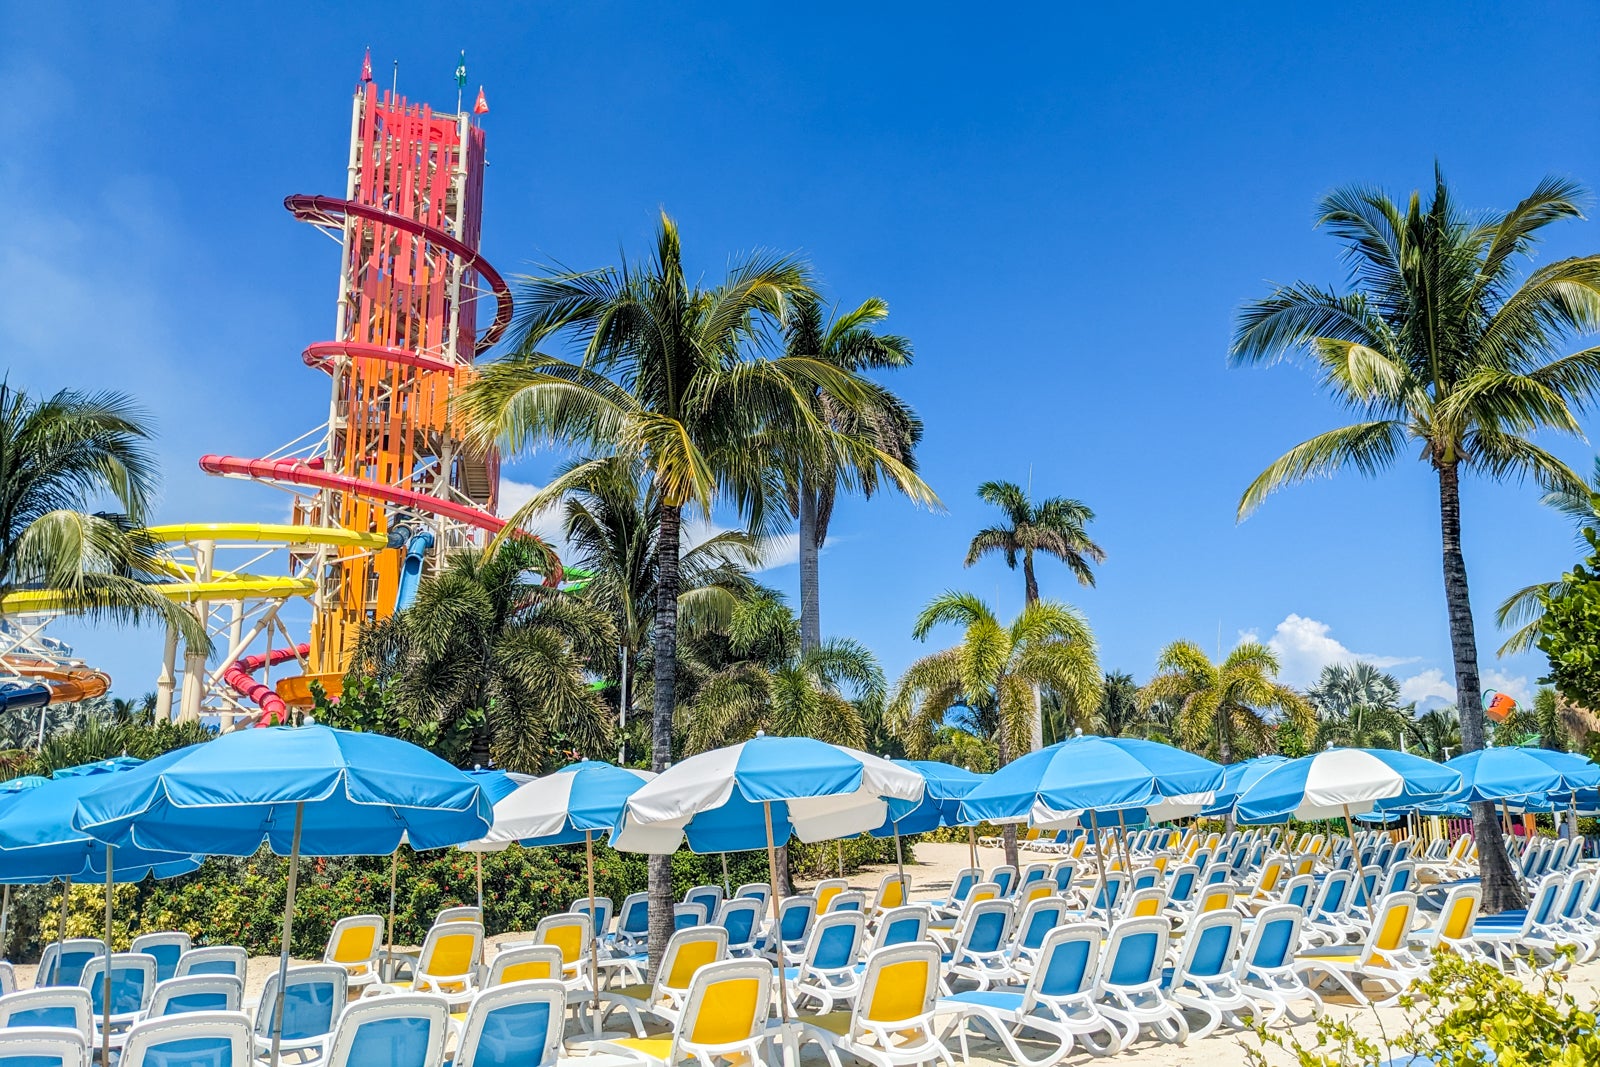 Waterslide tower above beach chairs at Perfect Day at CocoCay.